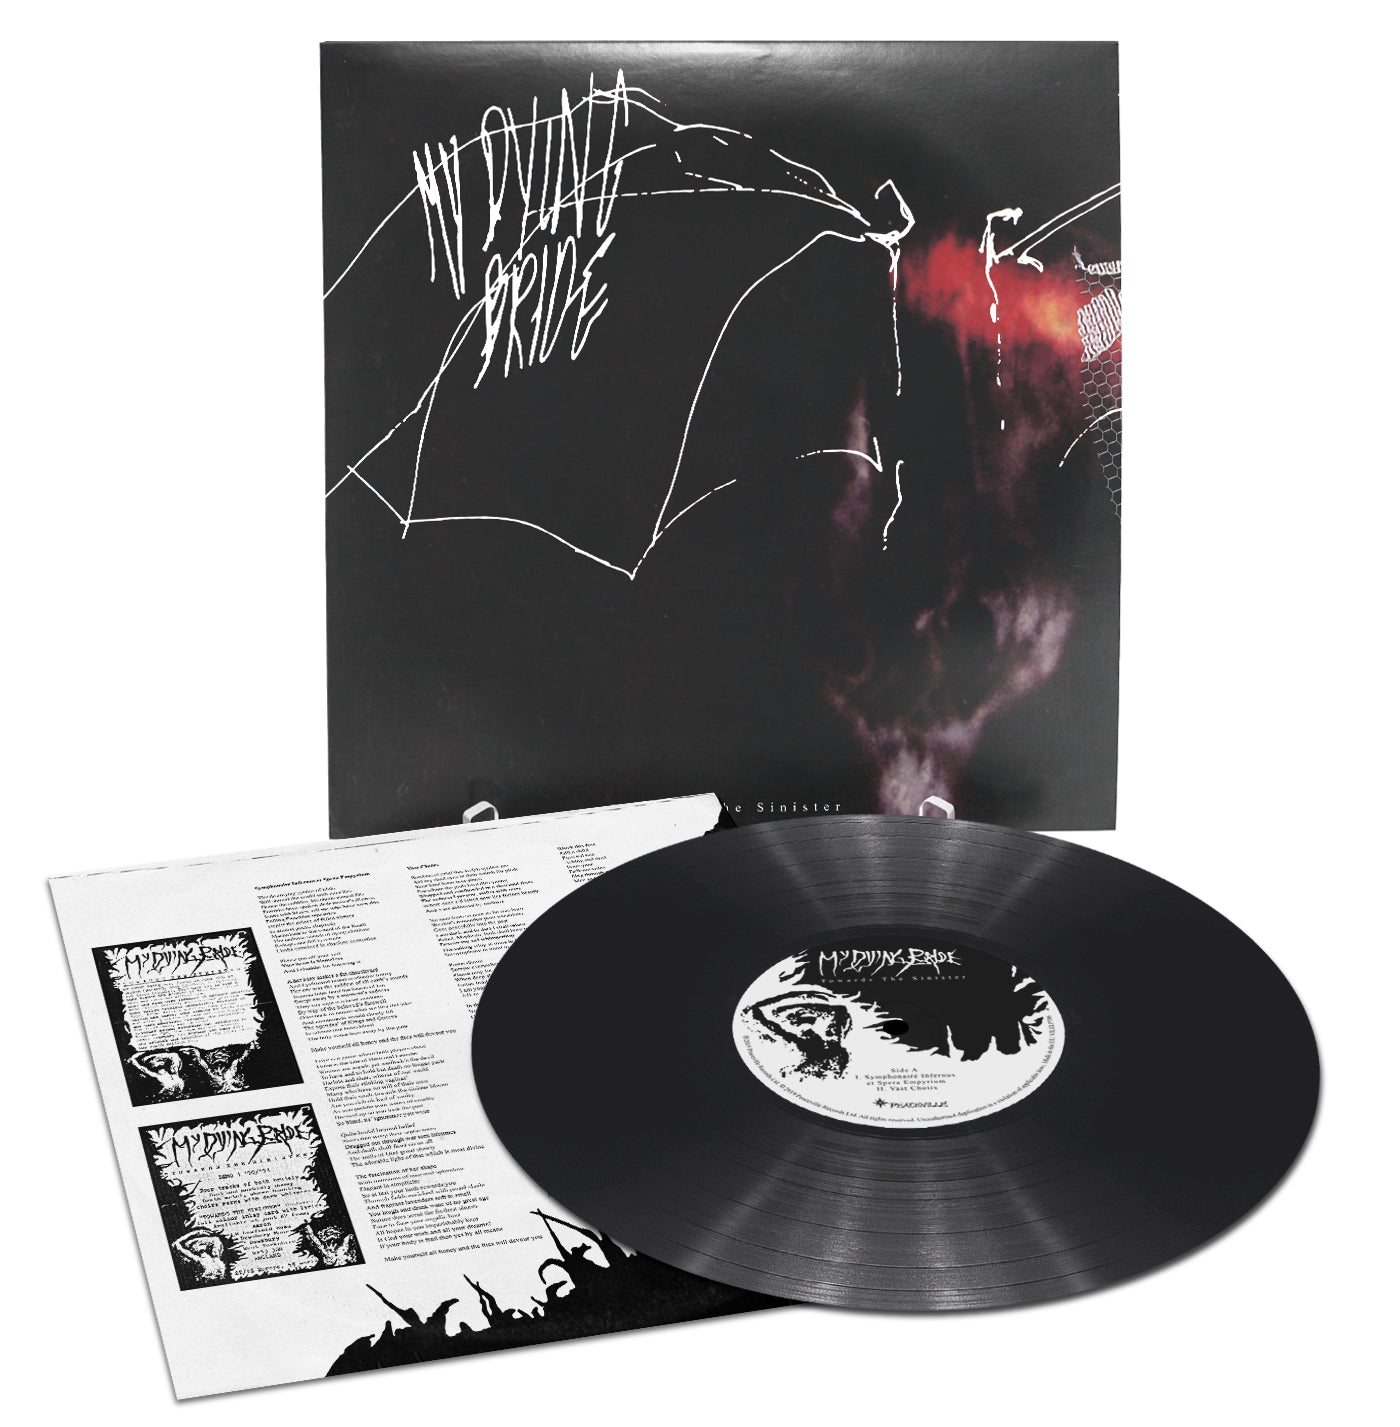 My Dying Bride "Towards The Sinister" Vinyl